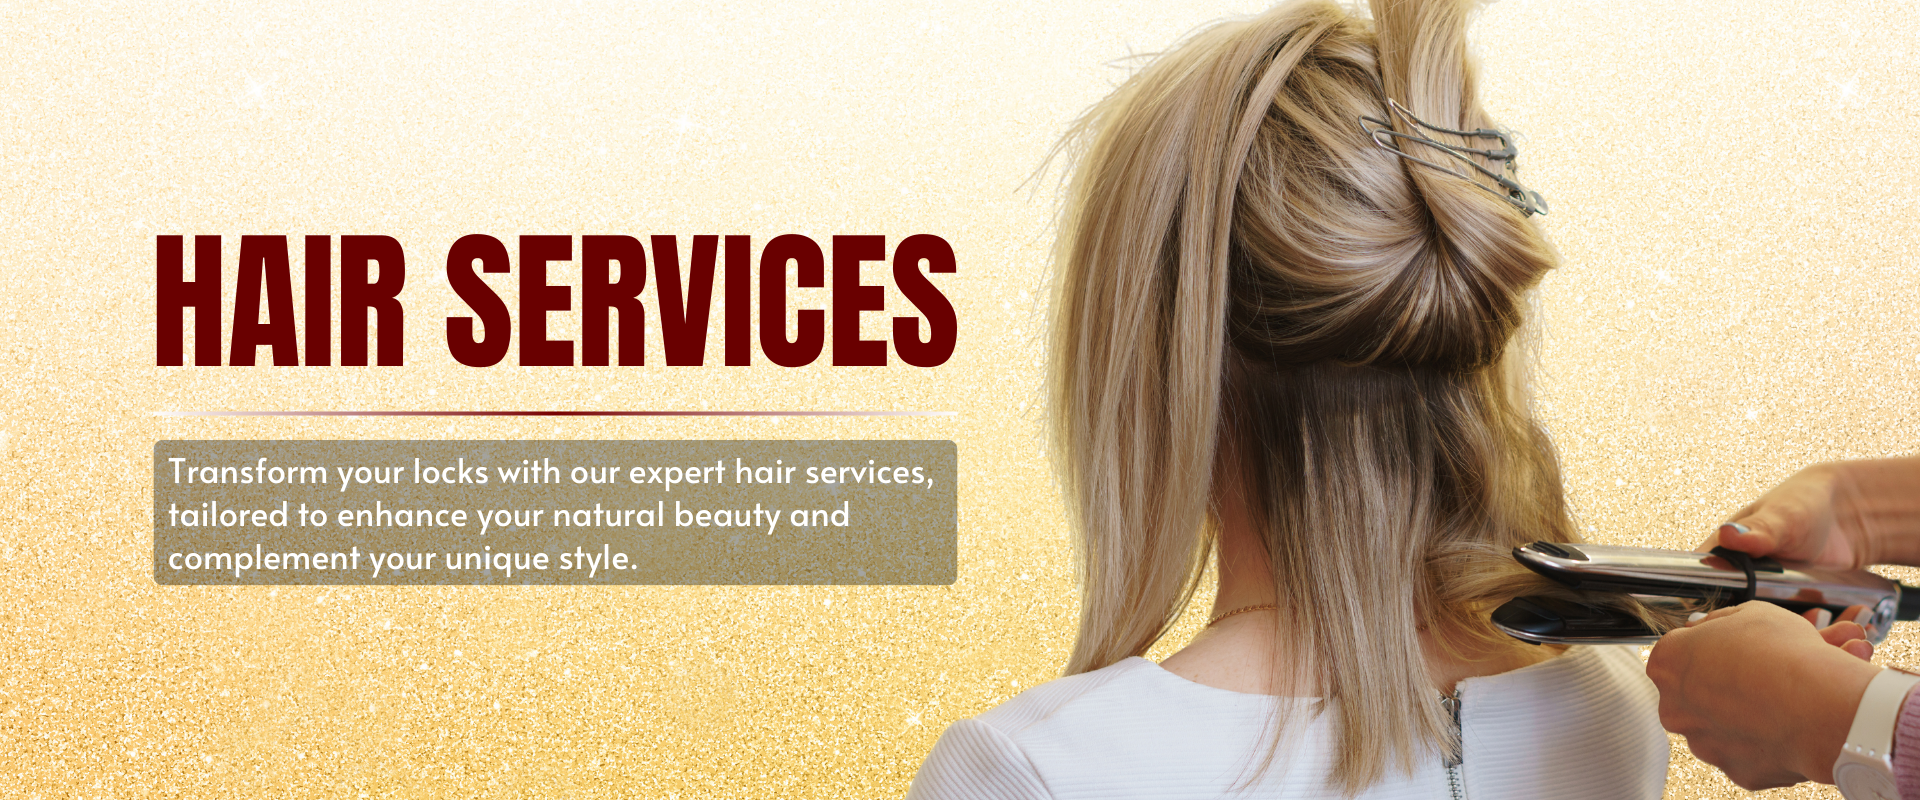 Transform your locks with our expert hair services, tailored to enhance your natural beauty and complement your unique style.